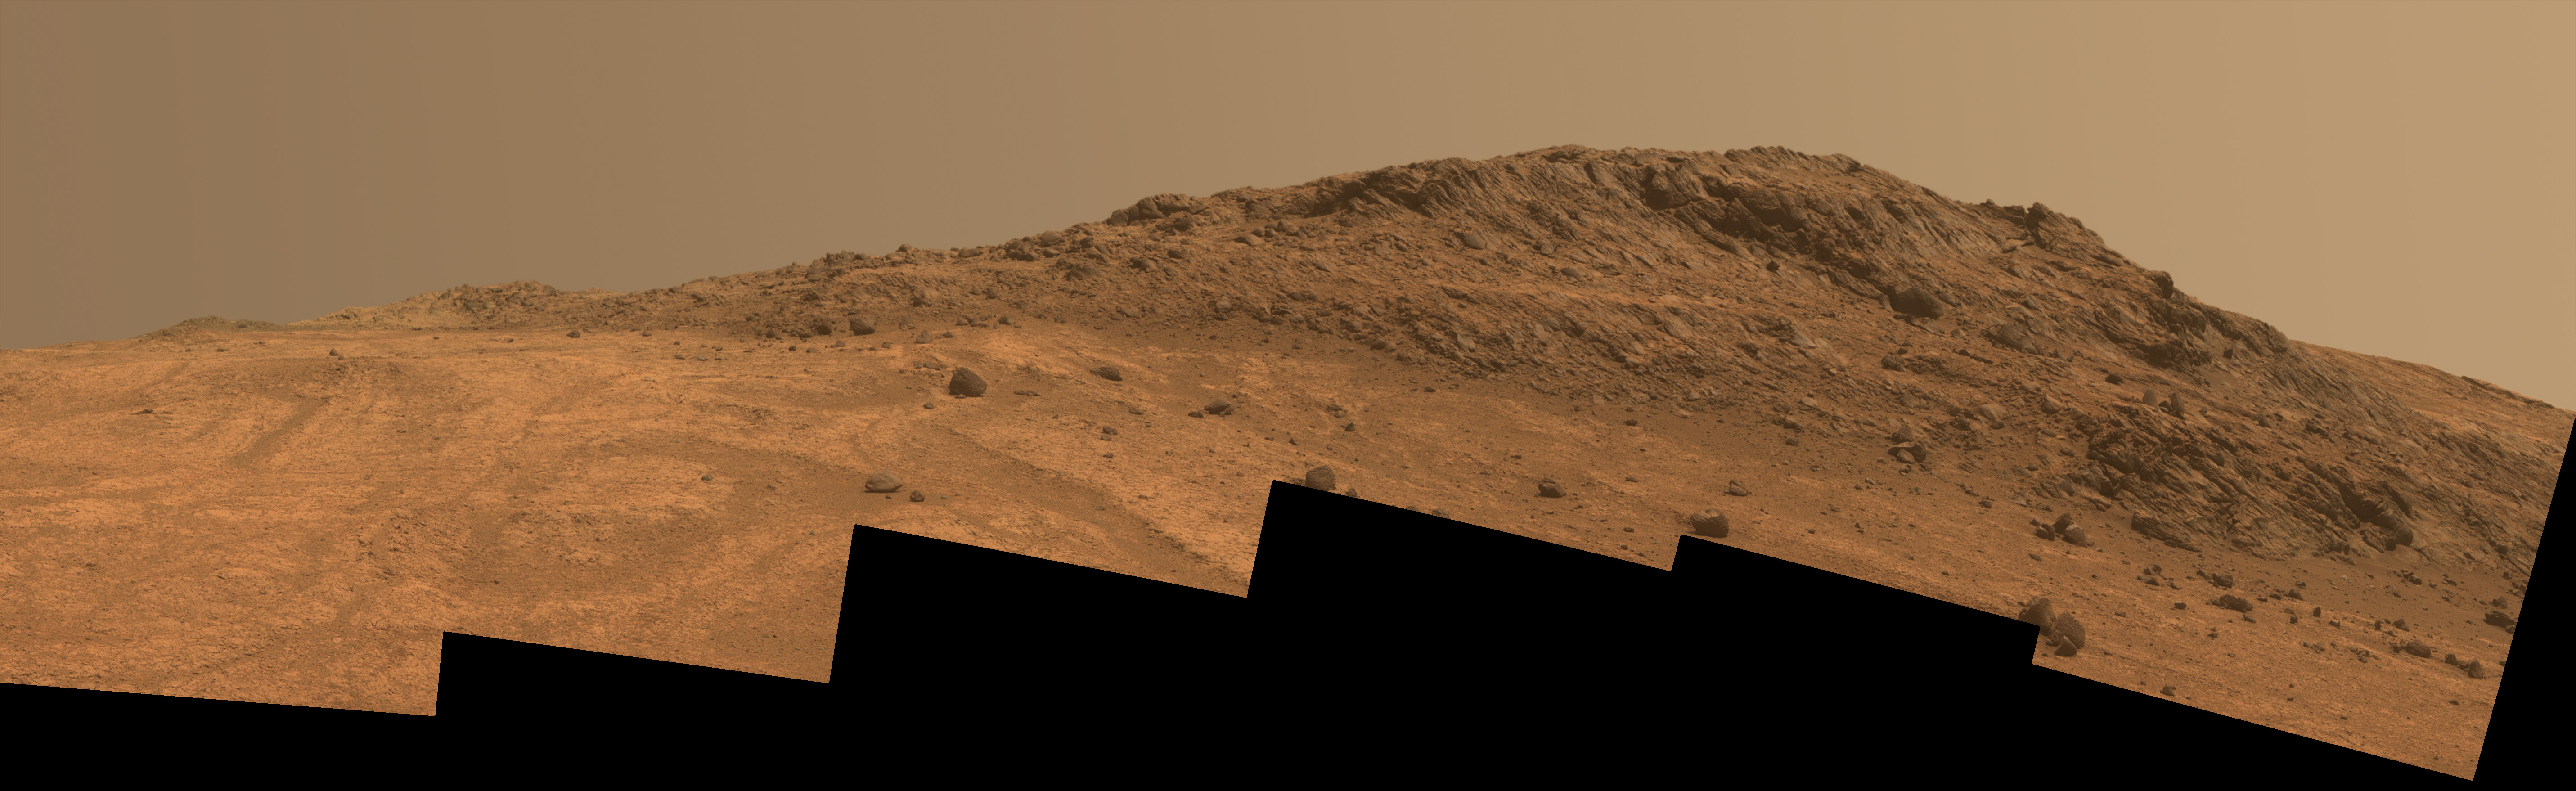 A view of the northern edge of Marathon Valley, taken by Opportunity on Aug. 14, 2015. The image, which is a collage of six individual frames from Opportunity's panoramic camera (Pancam), shows contrasting textures and colors at a place called Hinners Point (right) at the northern edge of Marathon Valley and swirling reddish zones on the valley floor to the left. Image Credit/Caption: NASA/JPL-Caltech/Cornell Univ./Arizona State Univ.